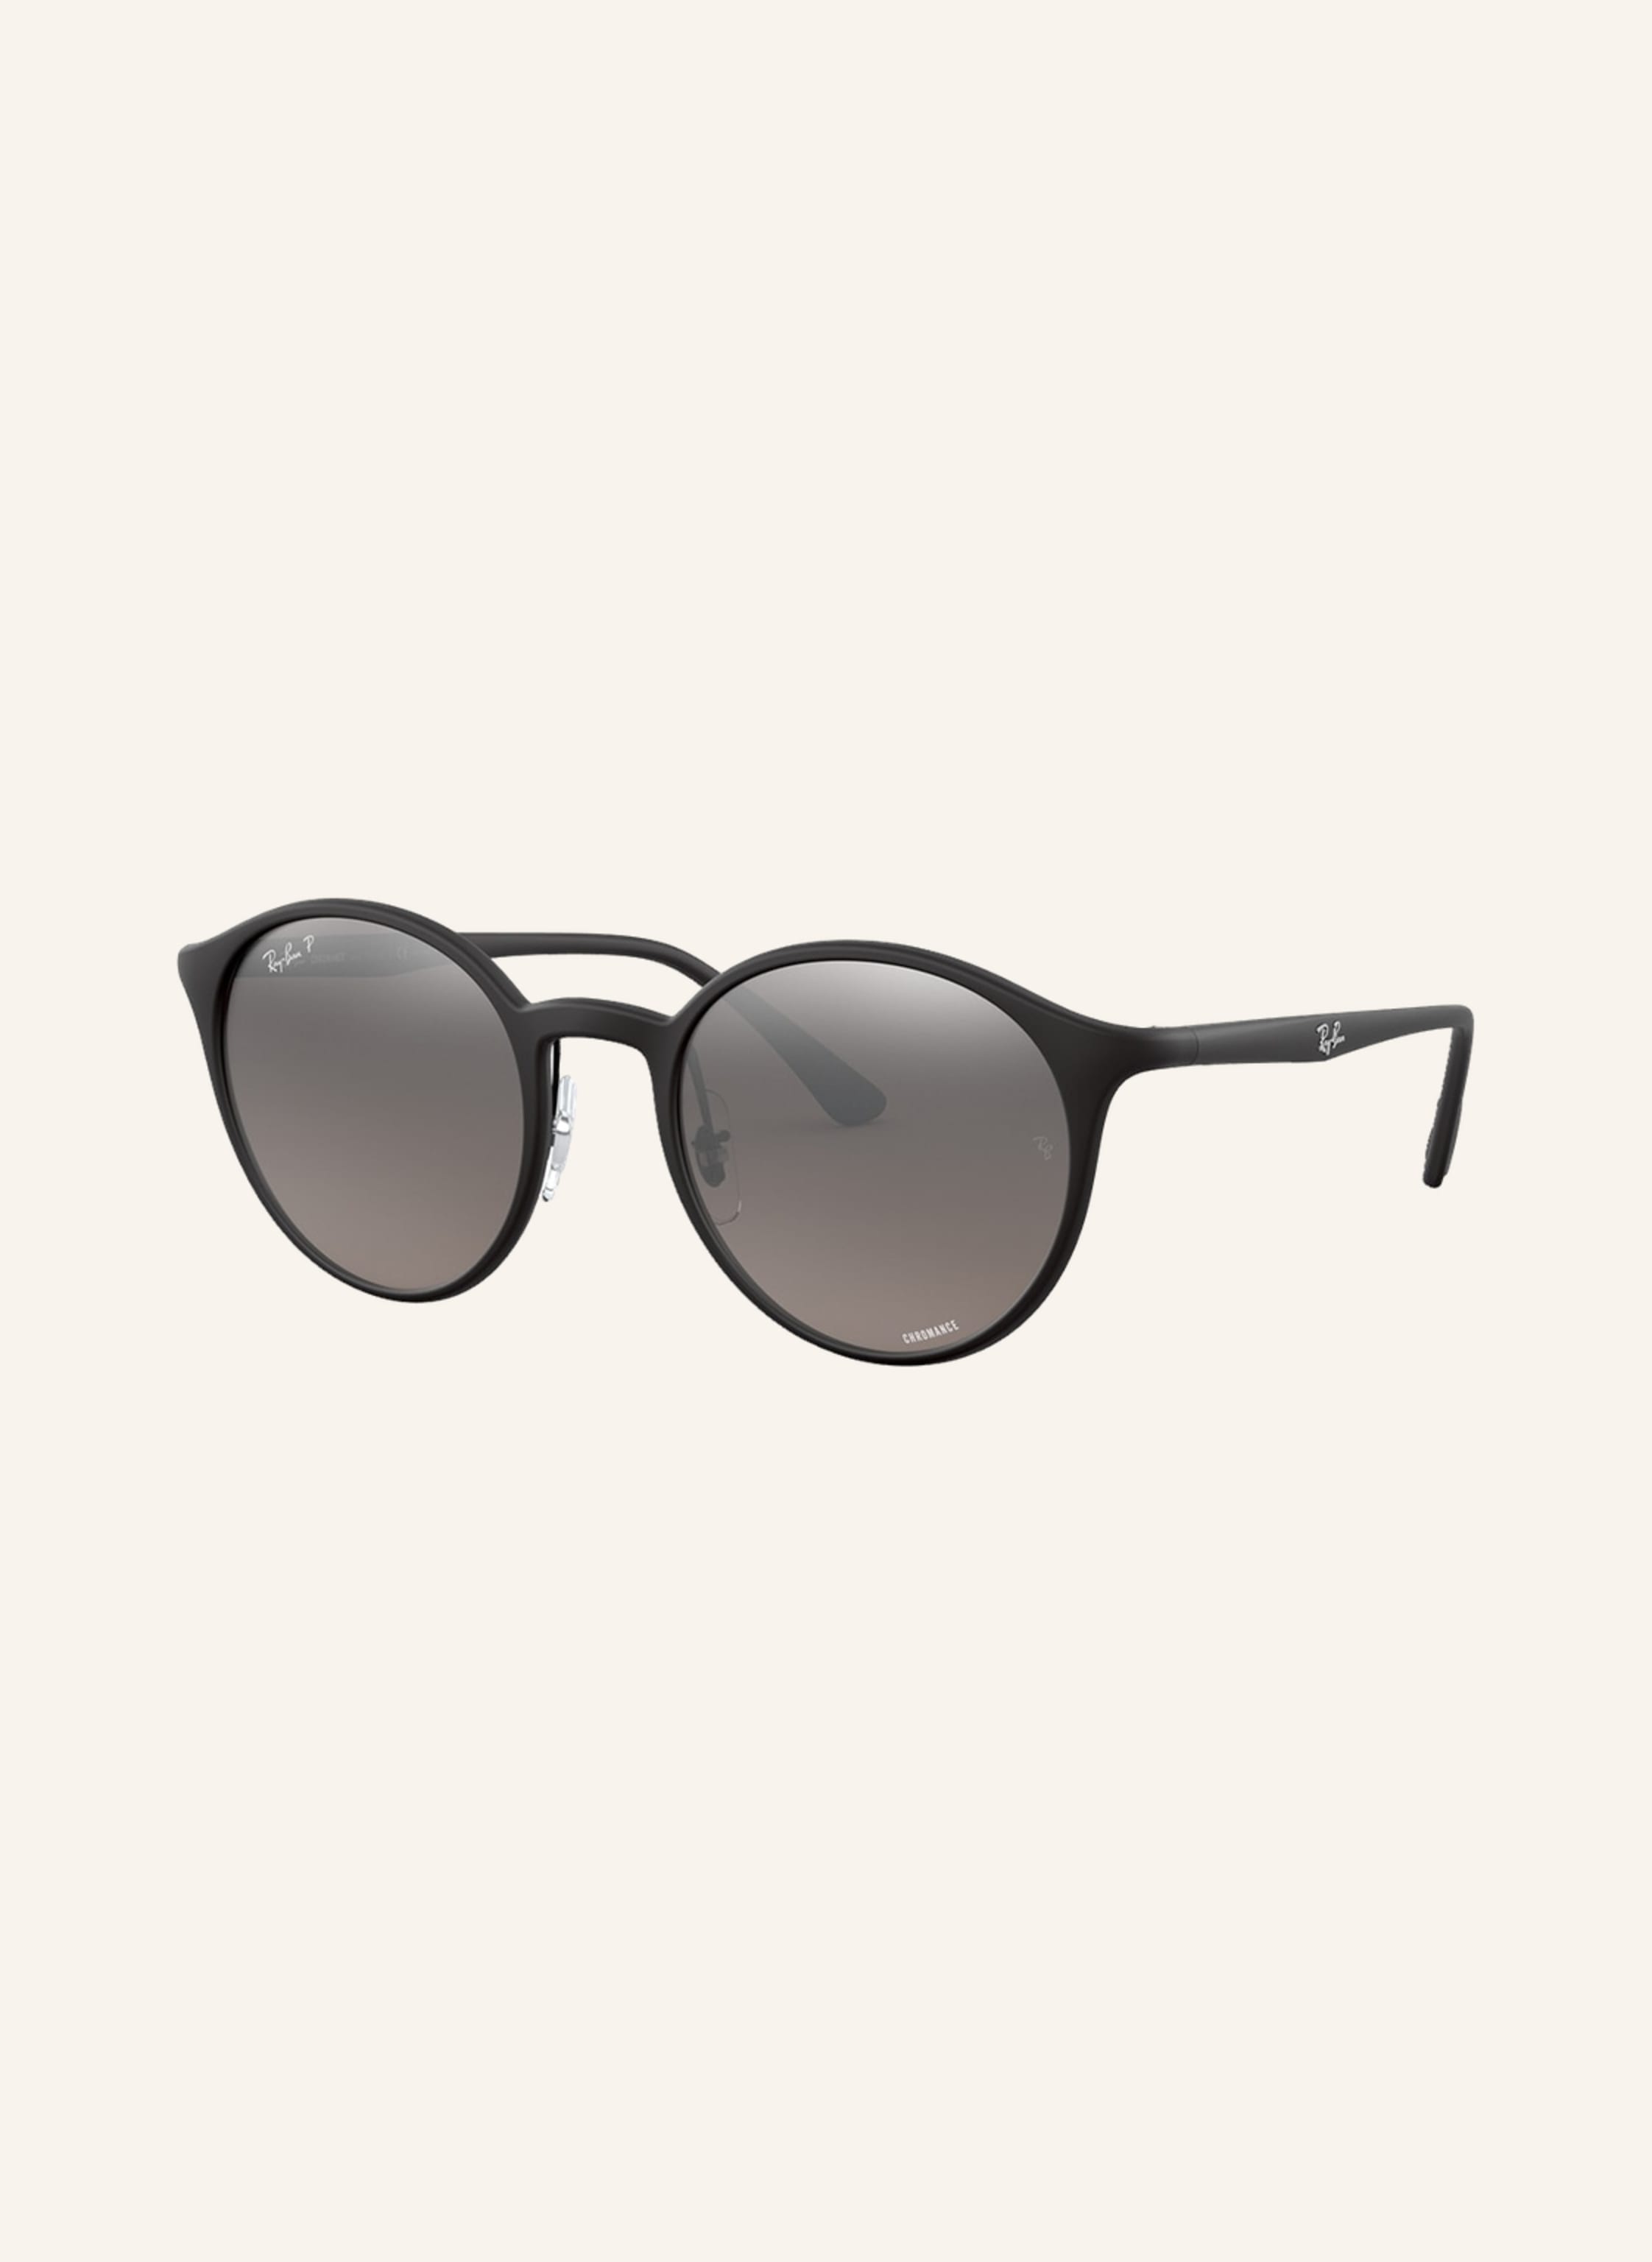 Ray-Ban Sunglasses RB4264 601S5J - Best Price and Available as Prescription  Sunglasses